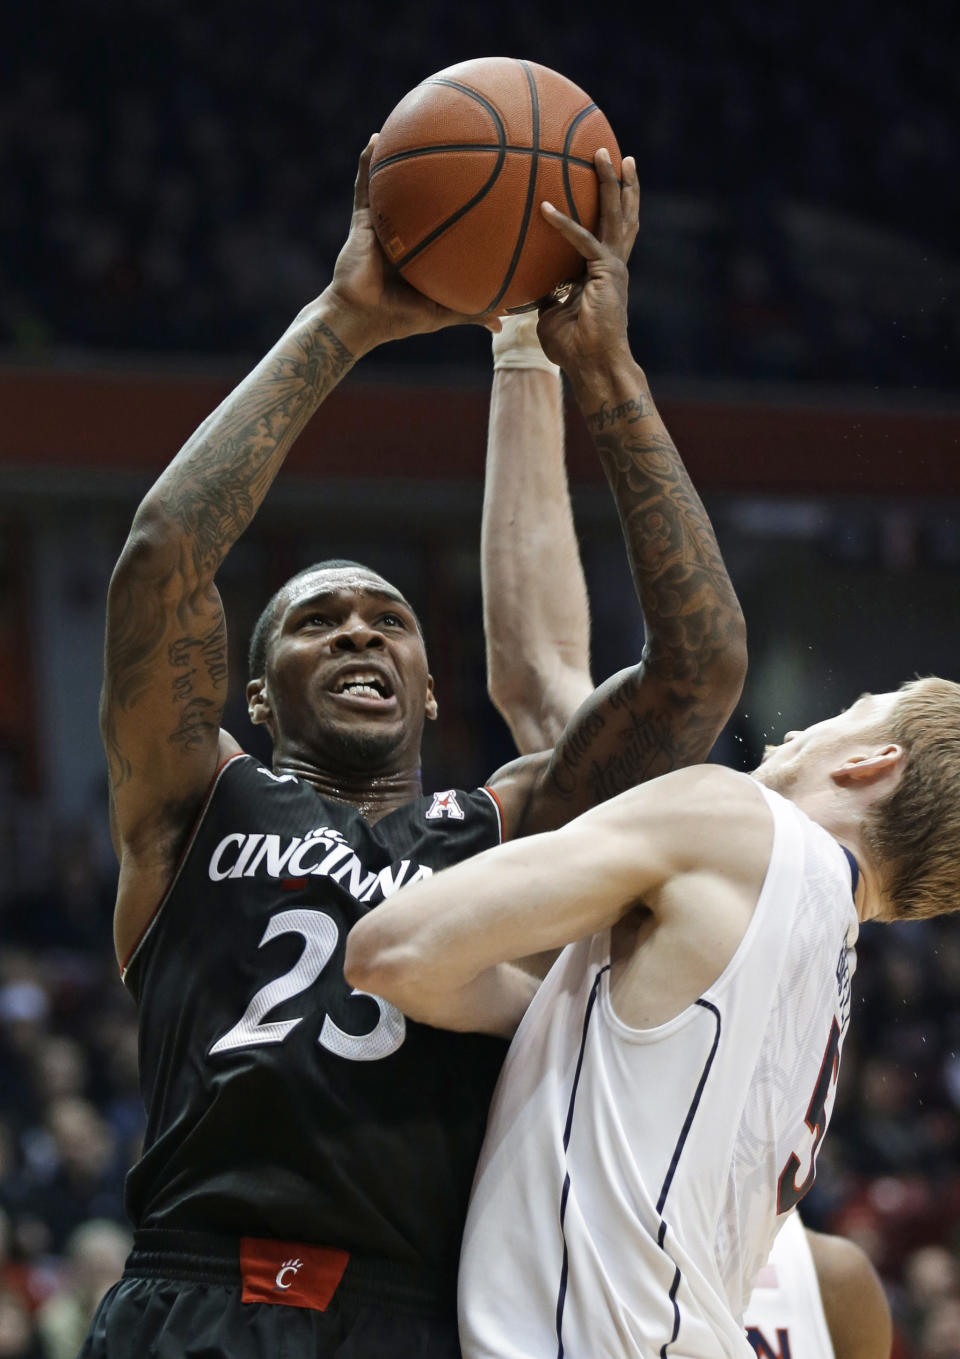 FILE - In this Feb. 6, 2014 file photo, Cincinnati guard Sean Kilpatrick (23) shoots against Connecticut guard Niels Giffey during the first half of an NCAA college basketball game in Cincinnati. Kilpatrick was selected to The Associated Press All-America team, released Monday, March 31, 2014. (AP Photo/Al Behrman, File)